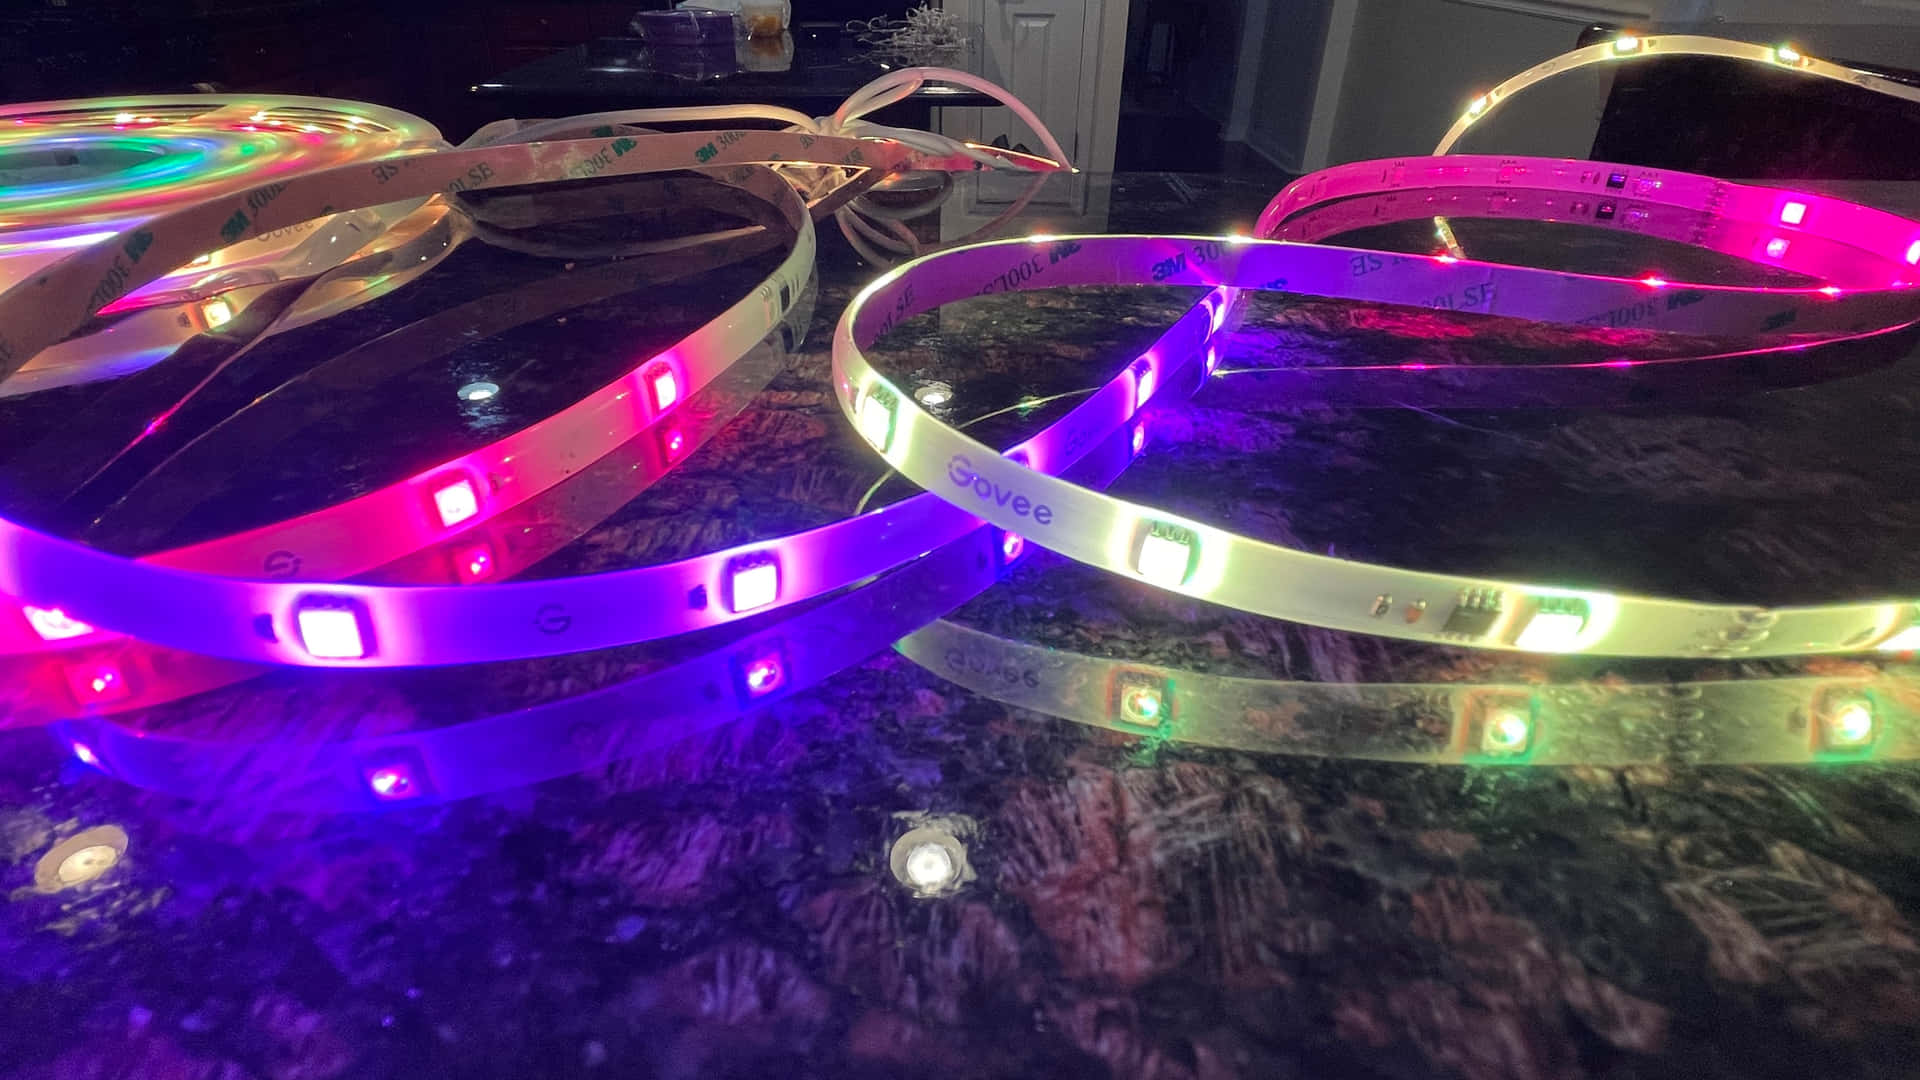 A Colorful Led Strip On A Counter